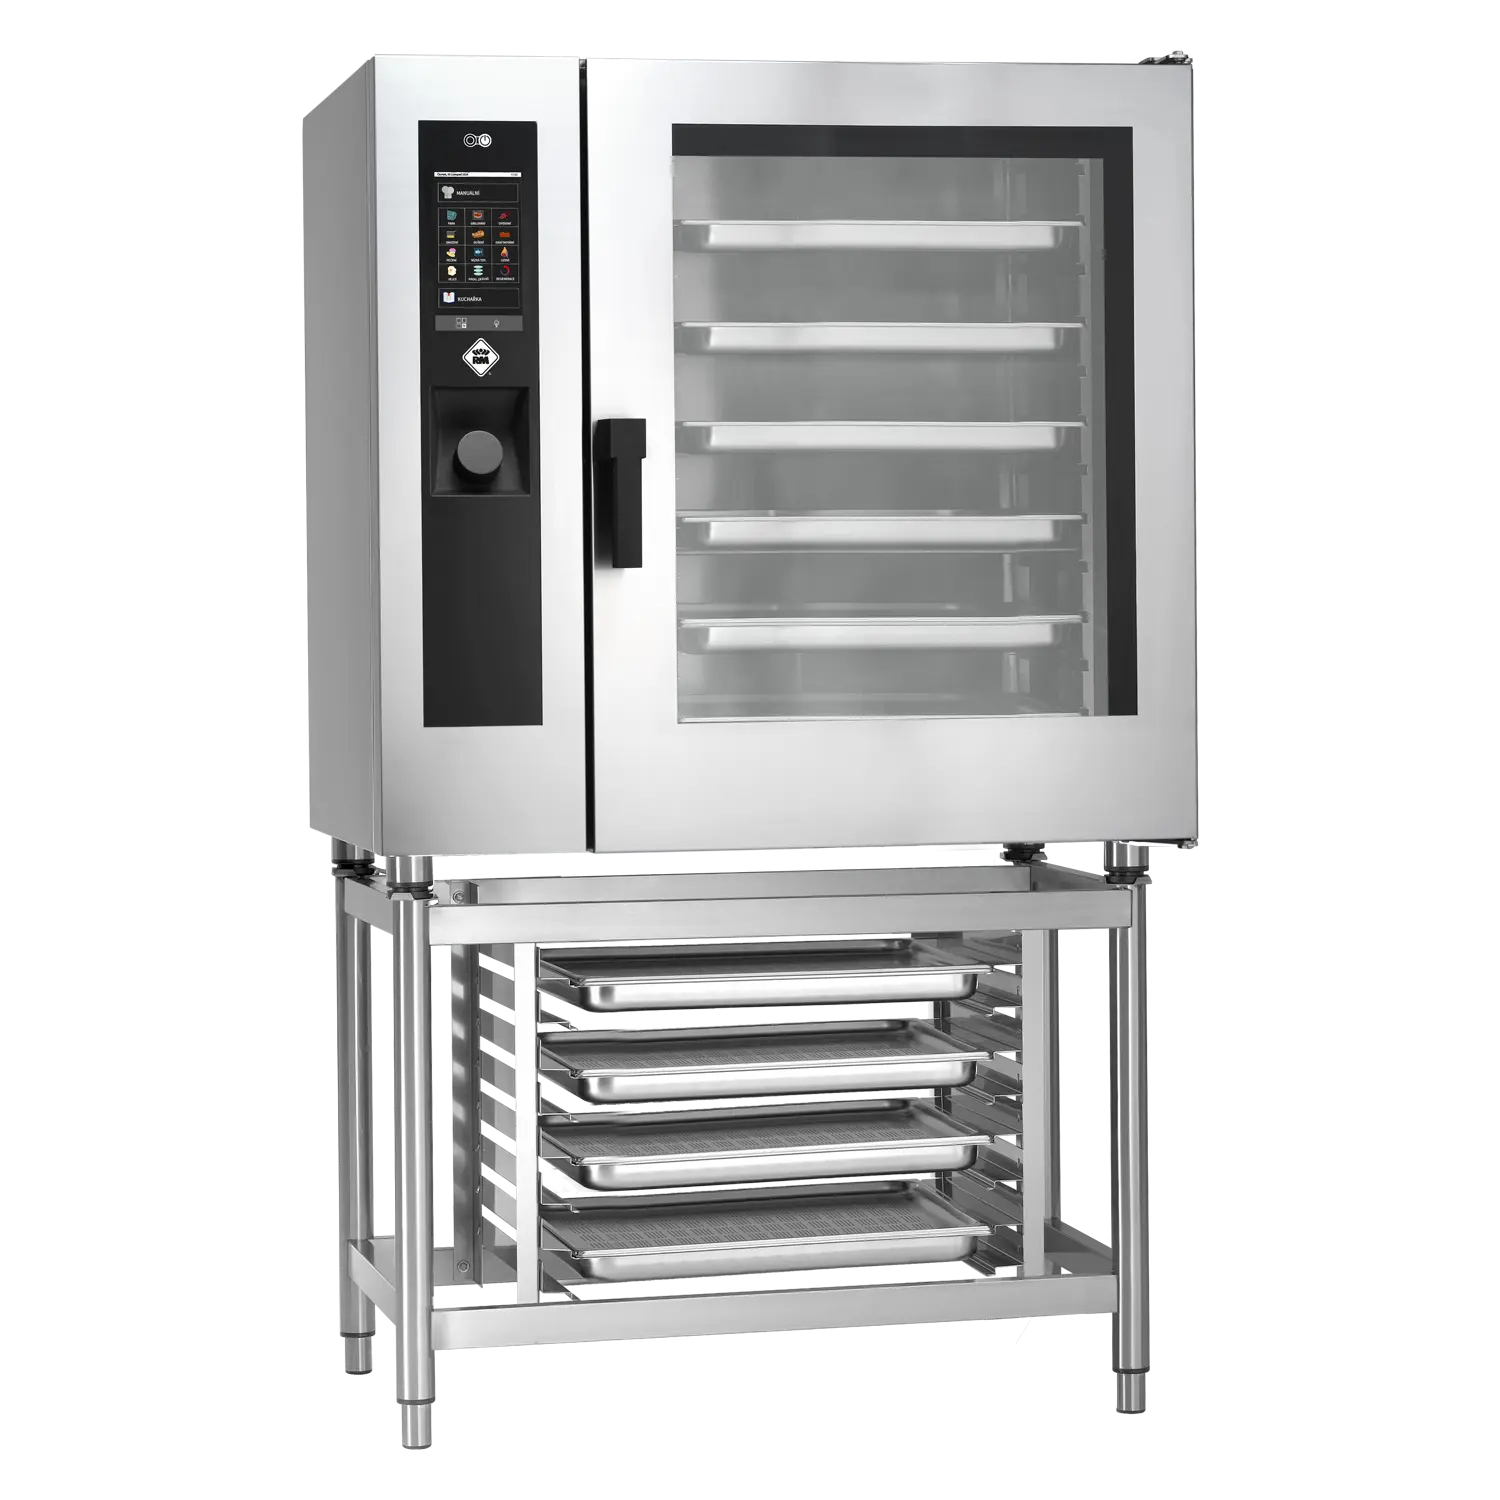 Electric ovens with steam фото 98